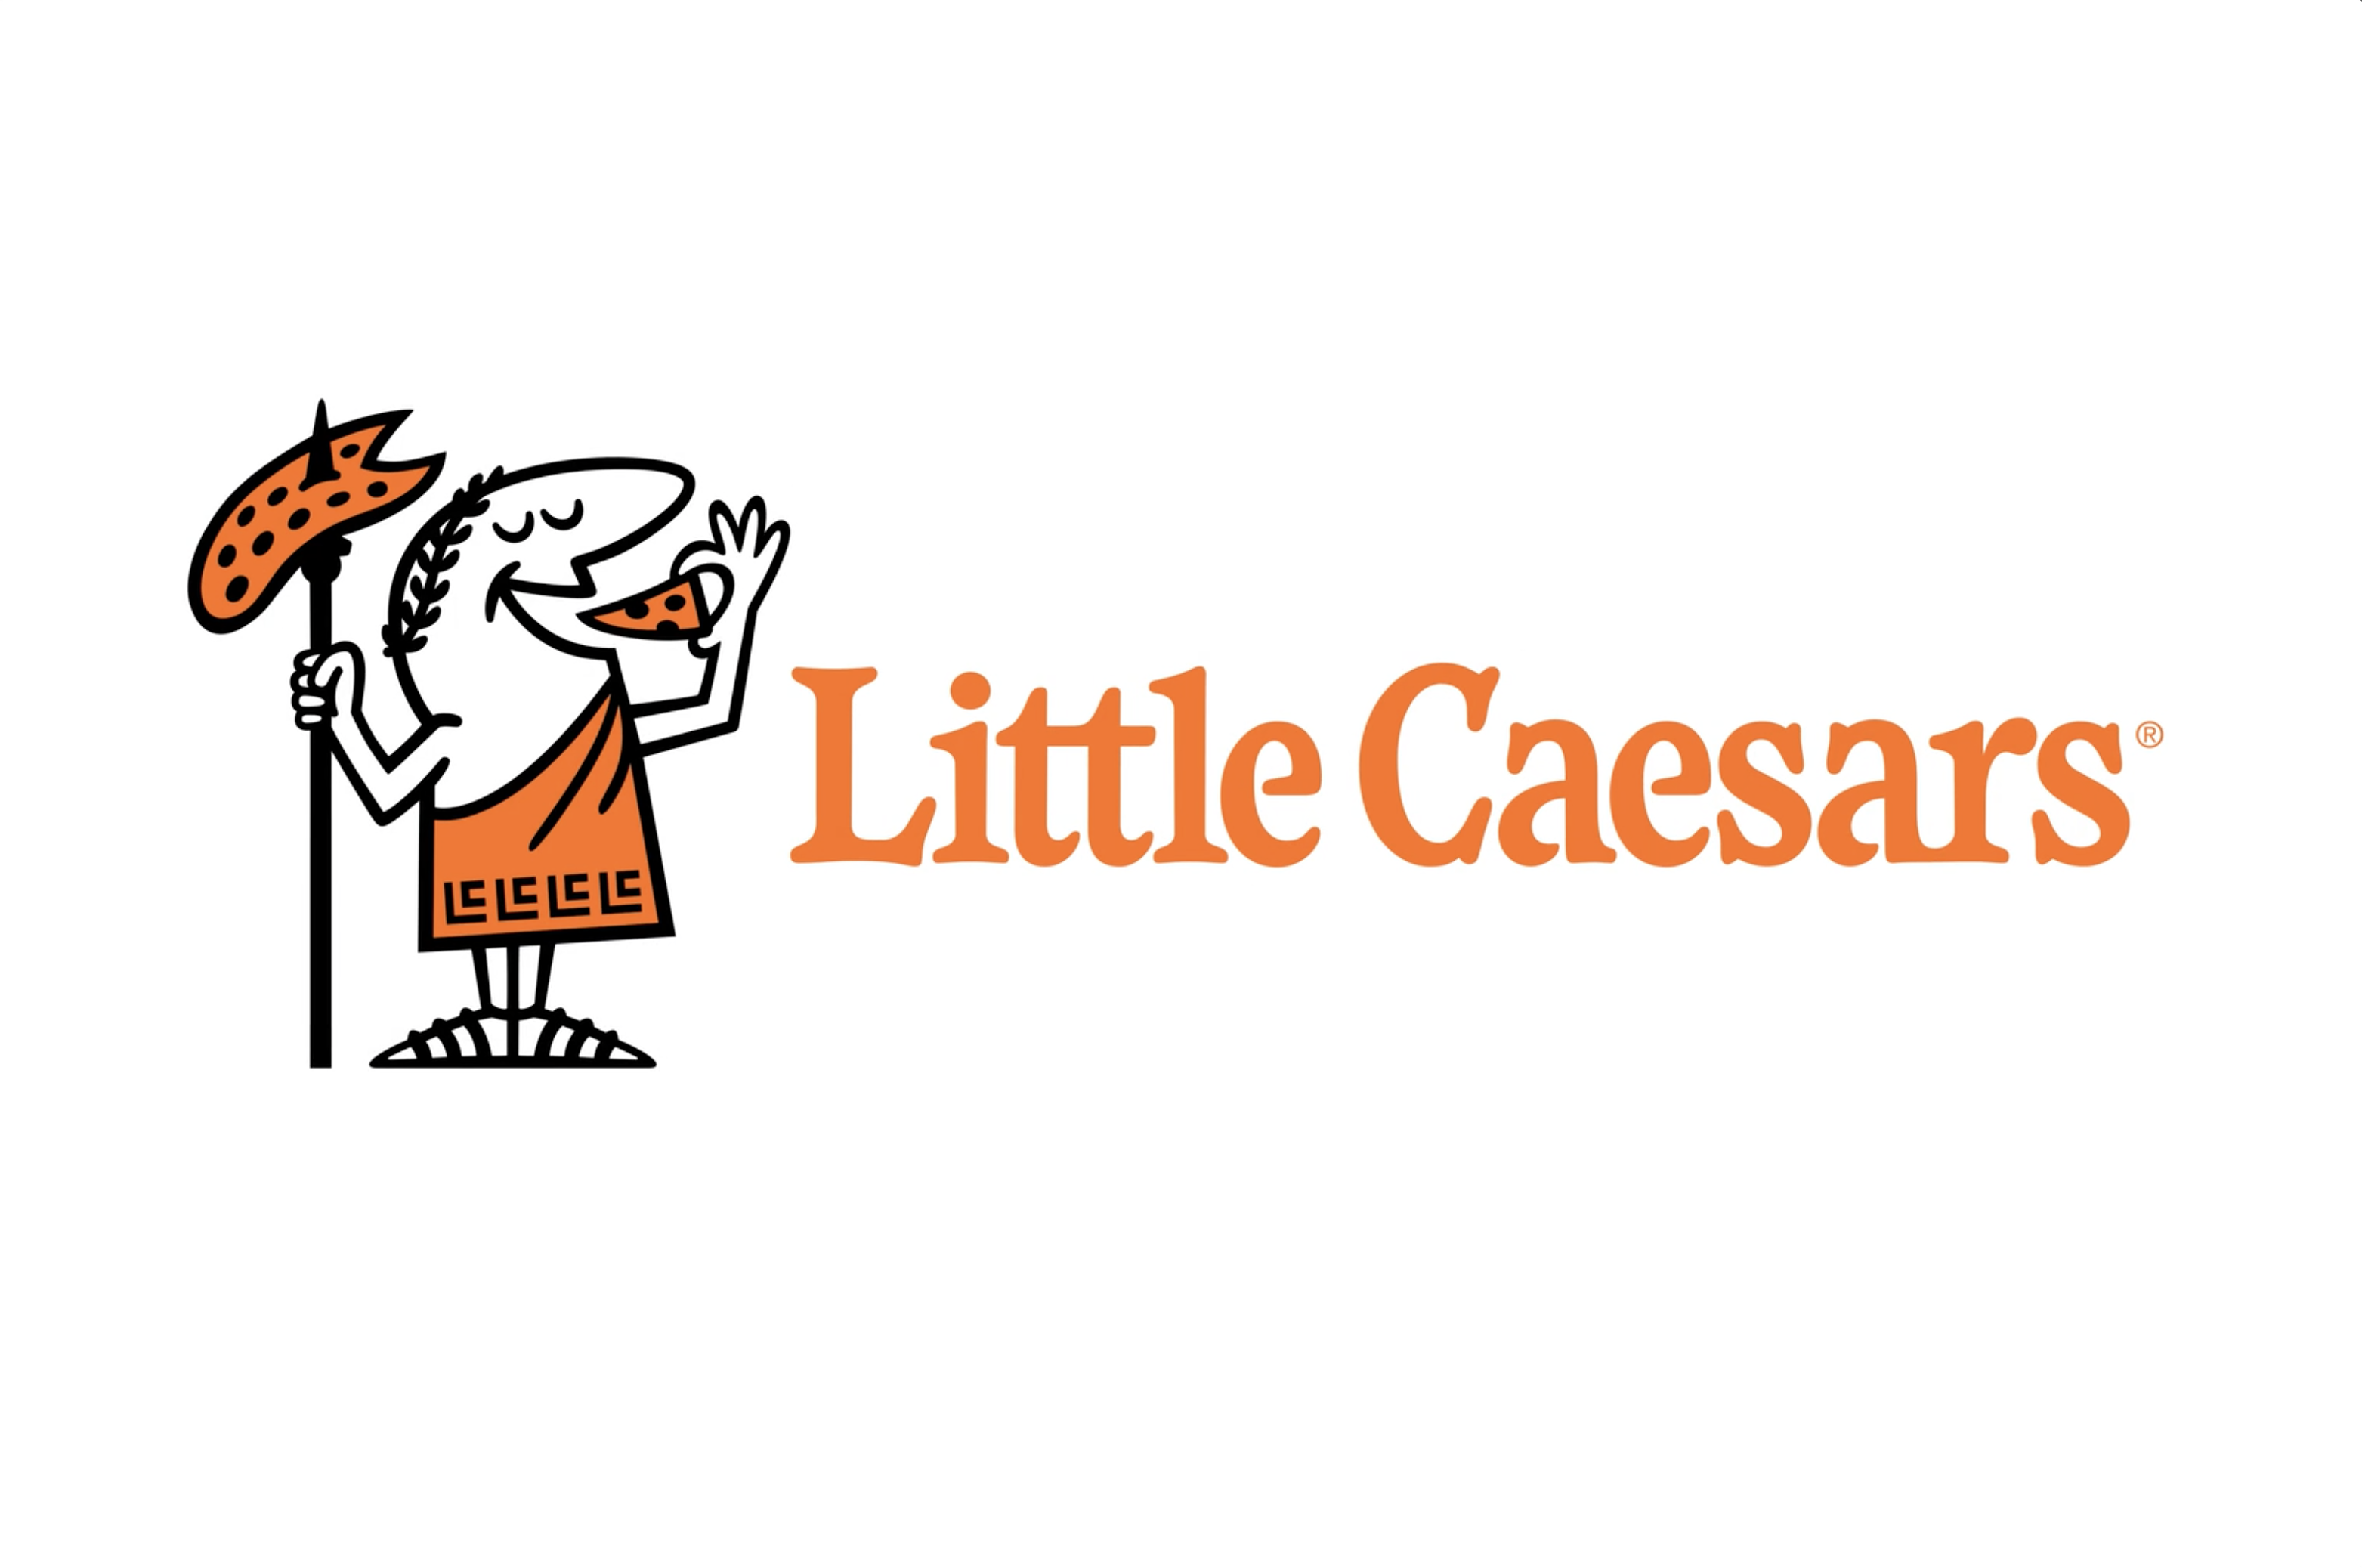 Little Caesars - $3.14 off any pizza, 3/14 only